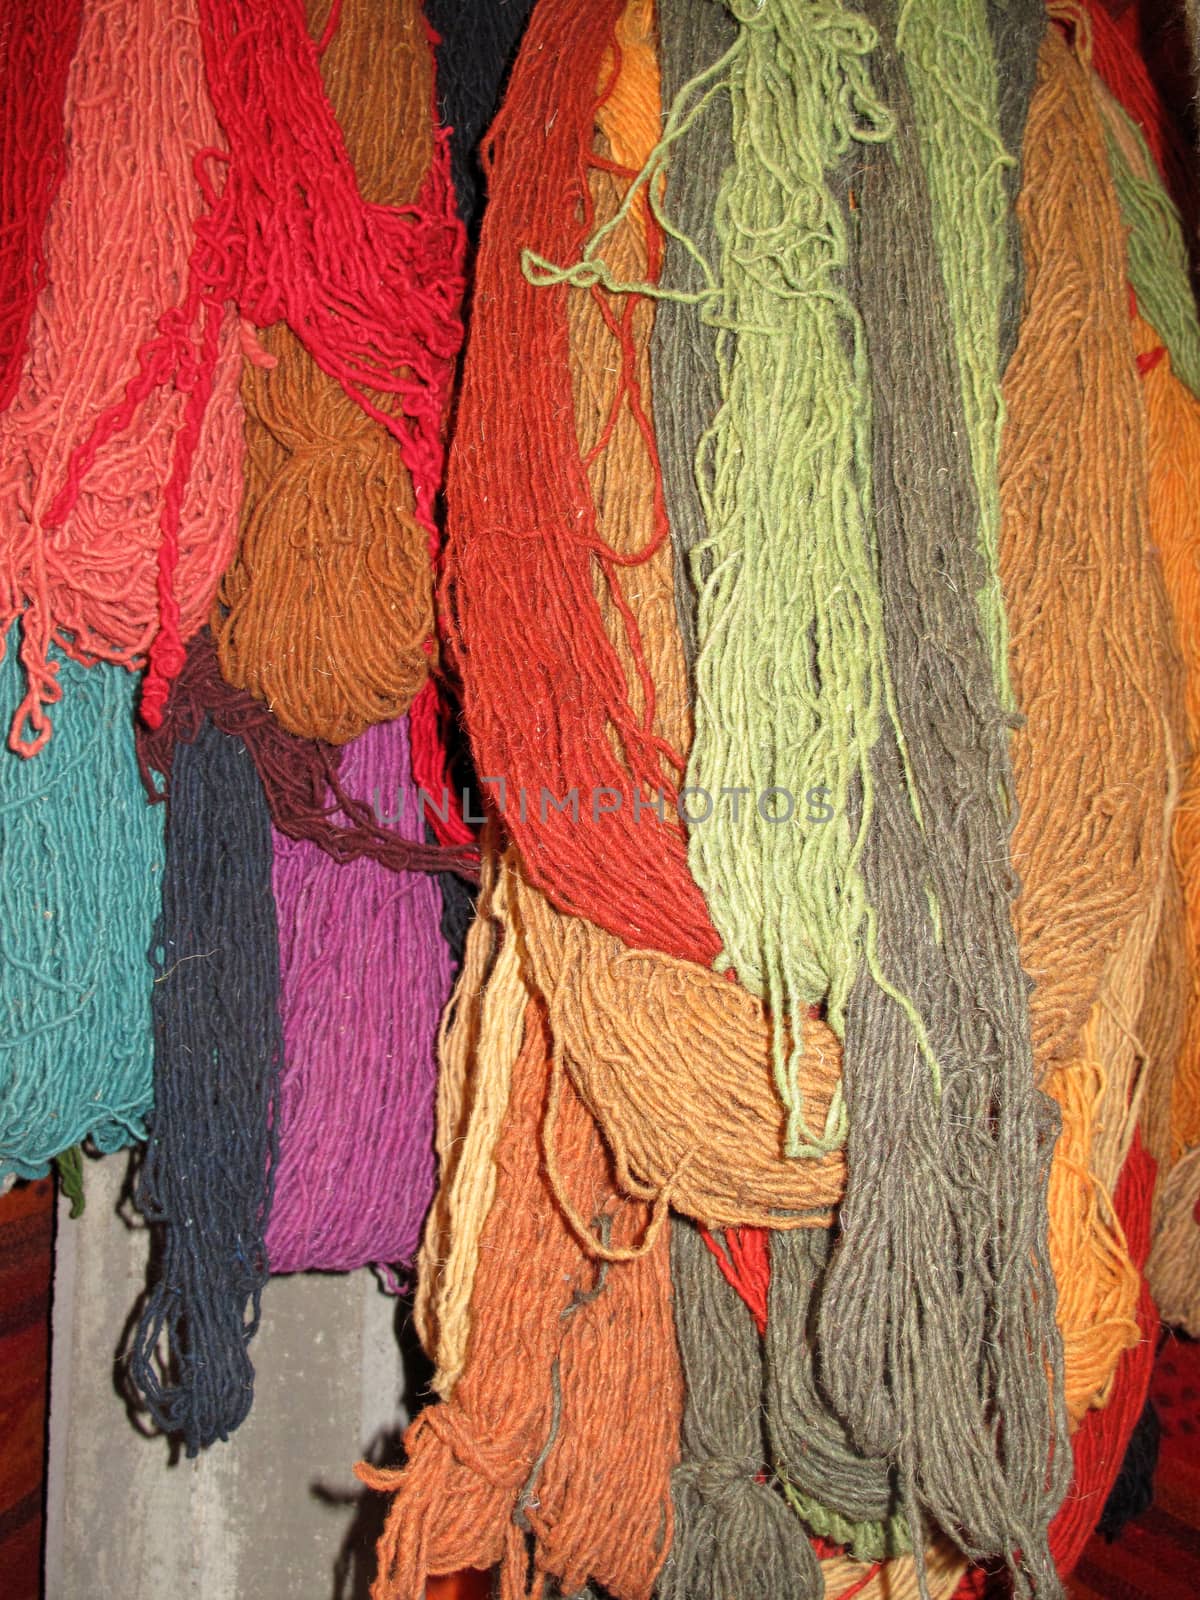 Bundles of dyed colorful wool, Mexico by cicloco